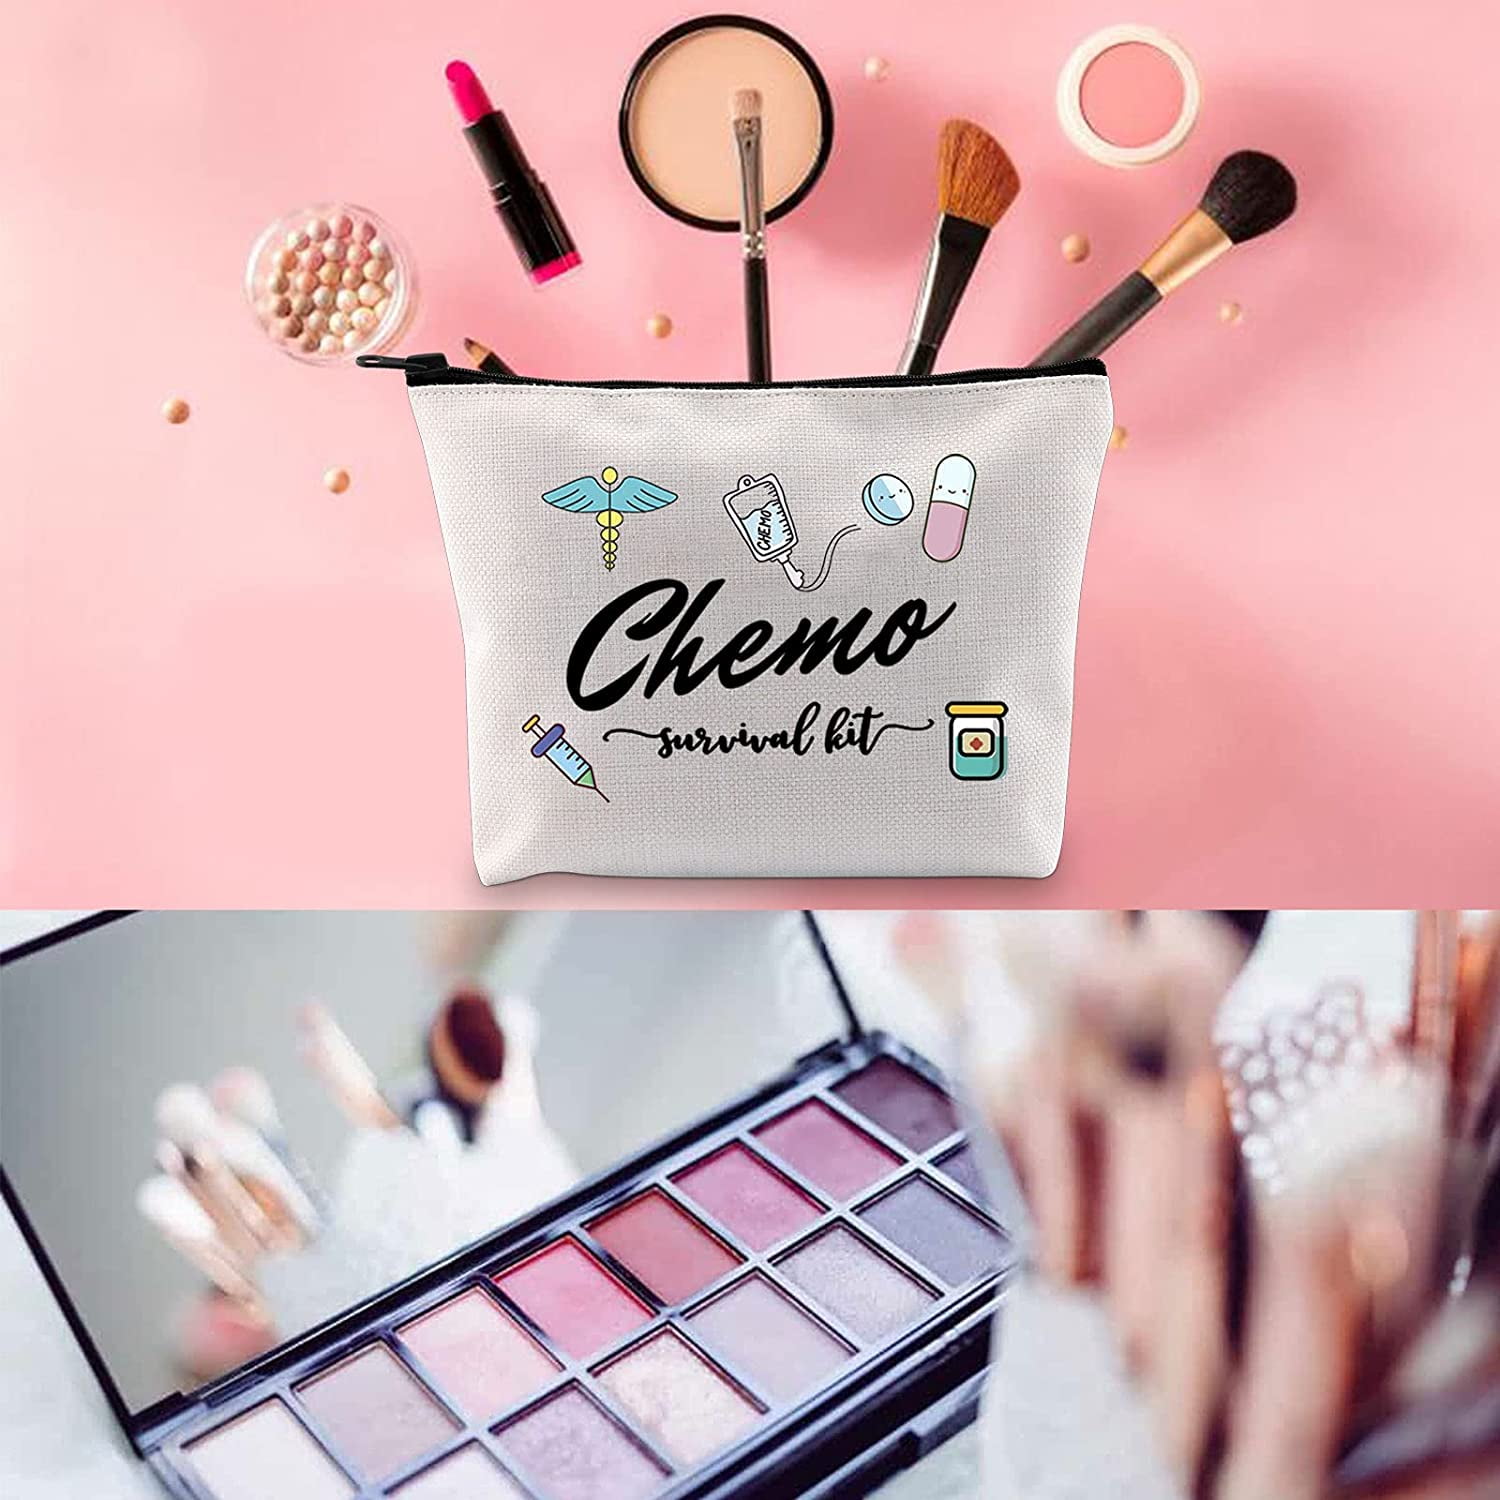  Chemo Care Package Chemo is Tough But You're Tougher  Chemotherapy Treatment Makeup Bag (Tough chemo) : Beauty & Personal Care